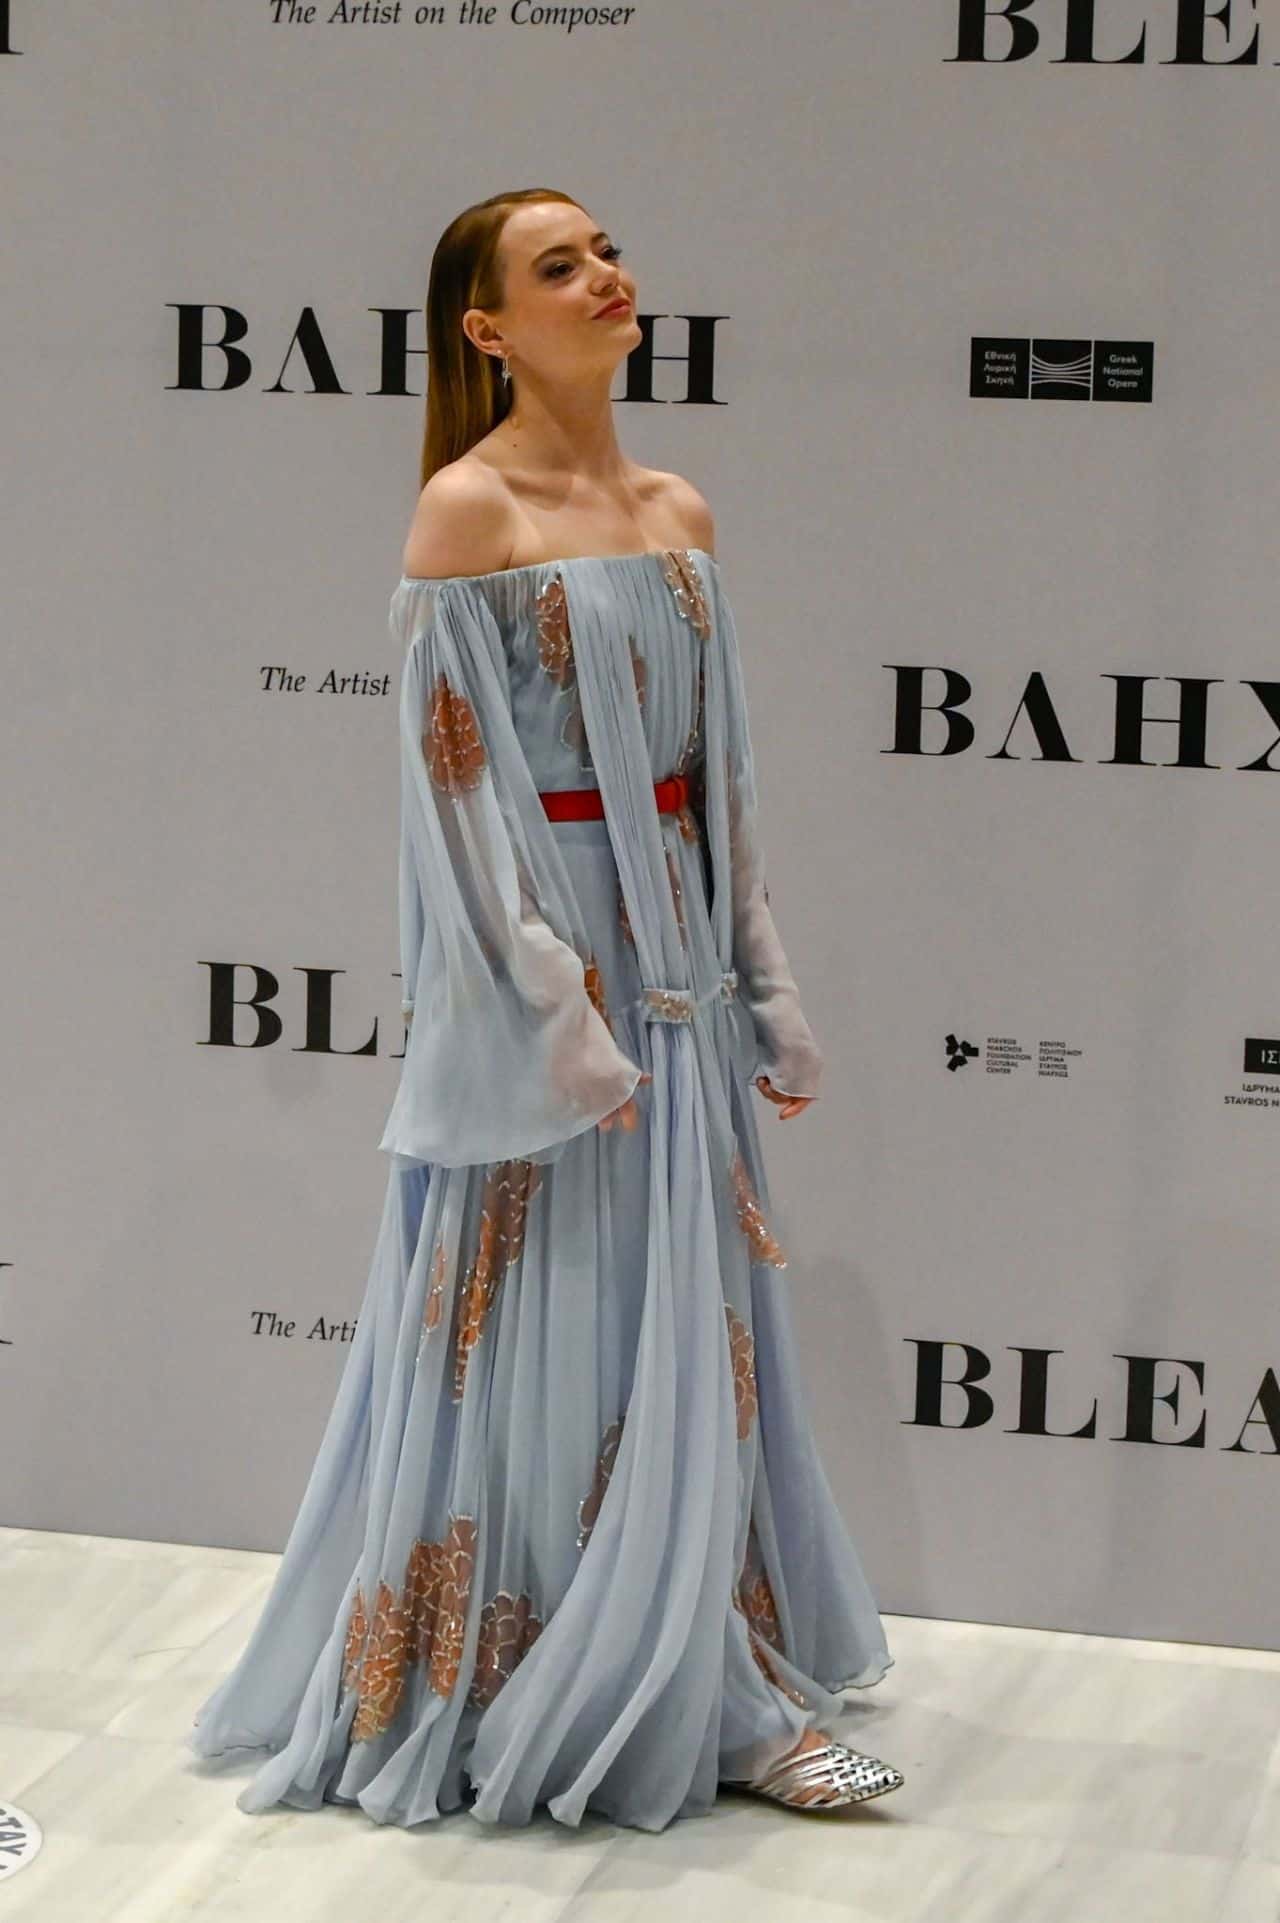 Emma Stone Stuns in a Pale Blue Dress at the Premiere of the Movie "Bleat"